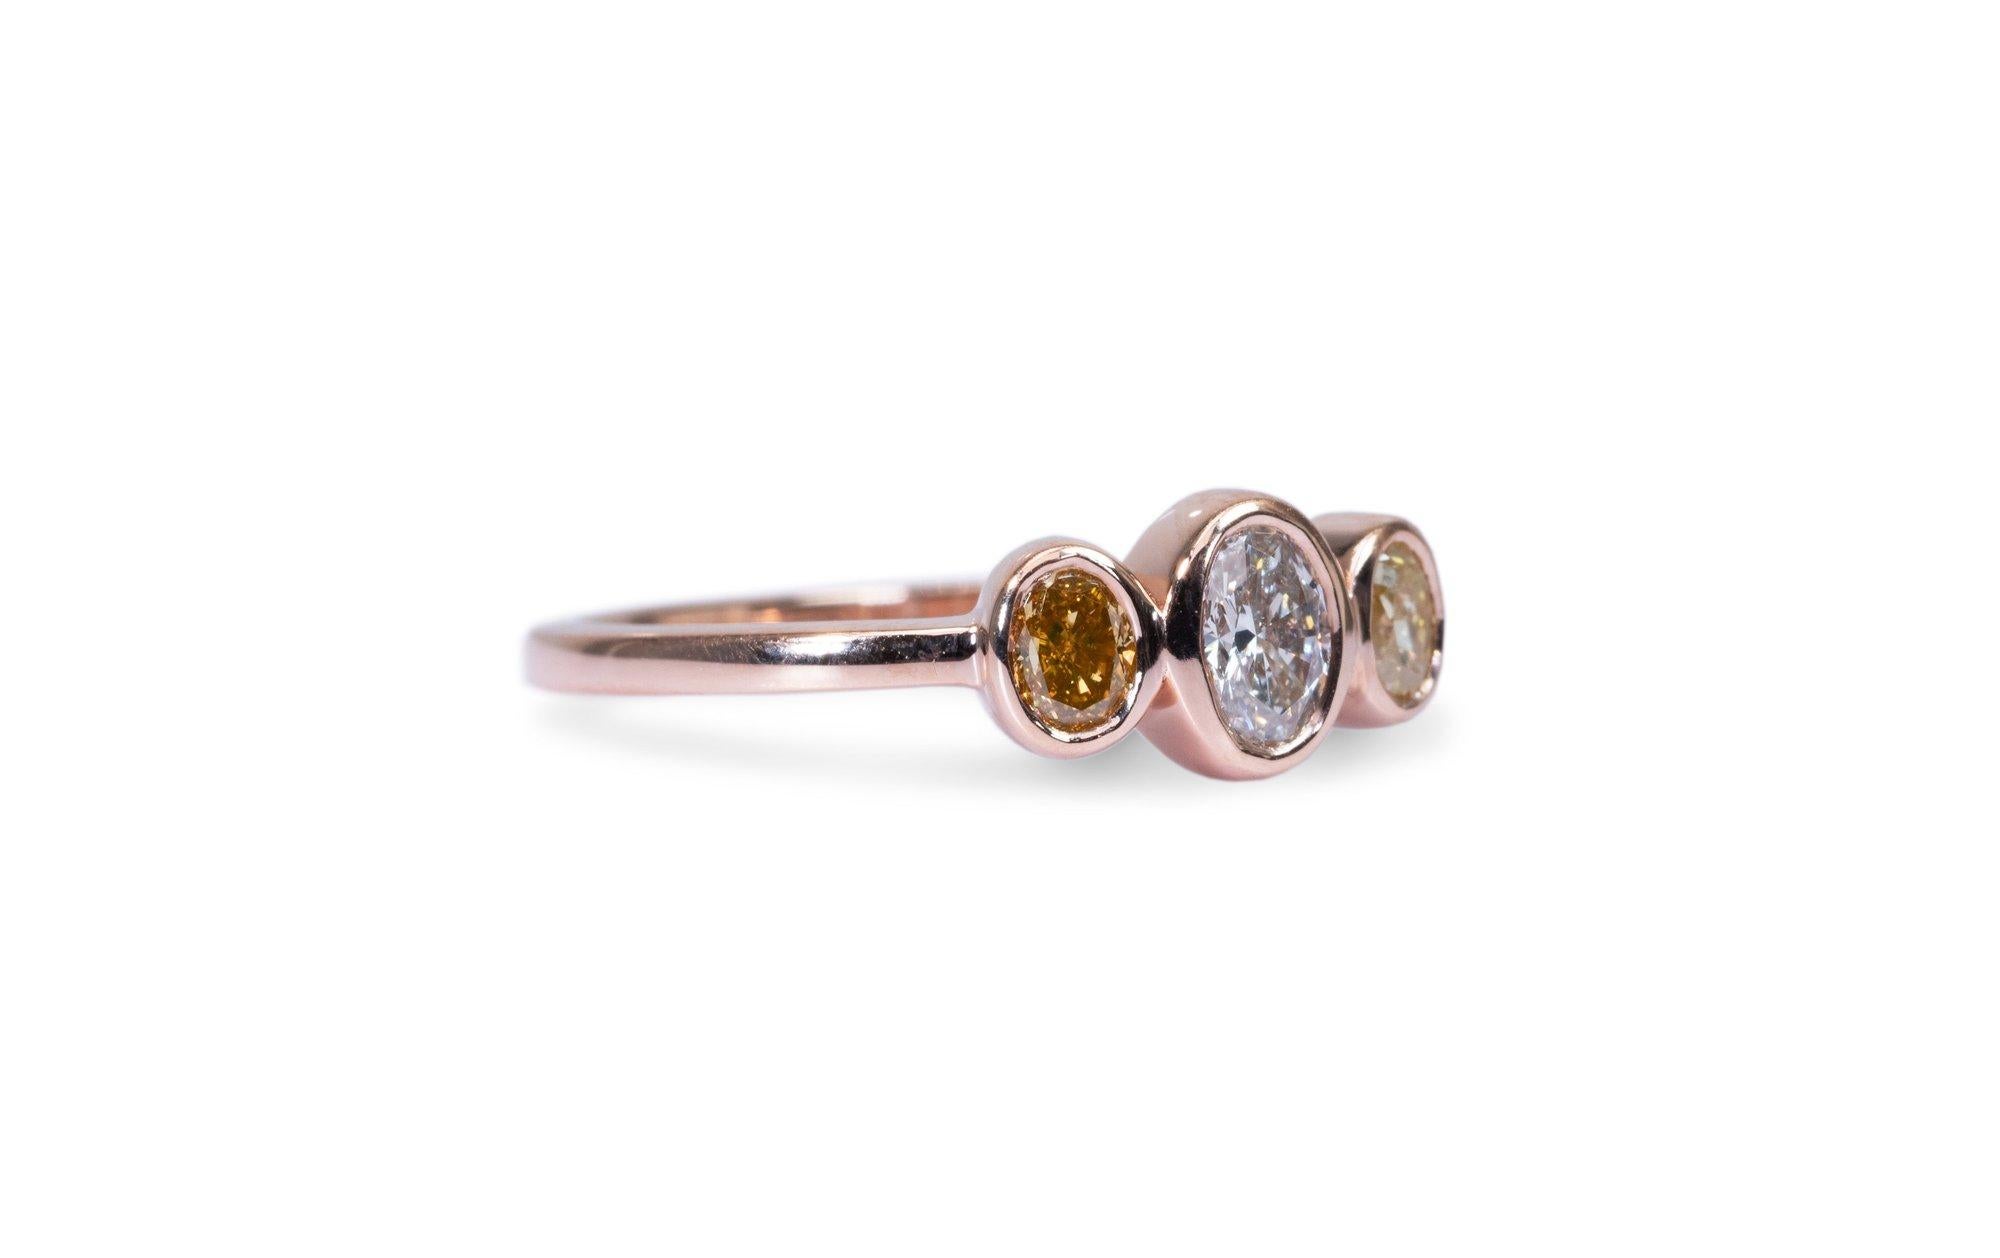 Beautiful and one of a kind 3 stone ring setting made from 18k rose gold with 0.46 carat of oval shape diamond and fancy brownish yellow oval diamonds. This ring comes with an AIG Certificate and a fancy box.

-1 diamond main stone of 0.20 ct.
cut: